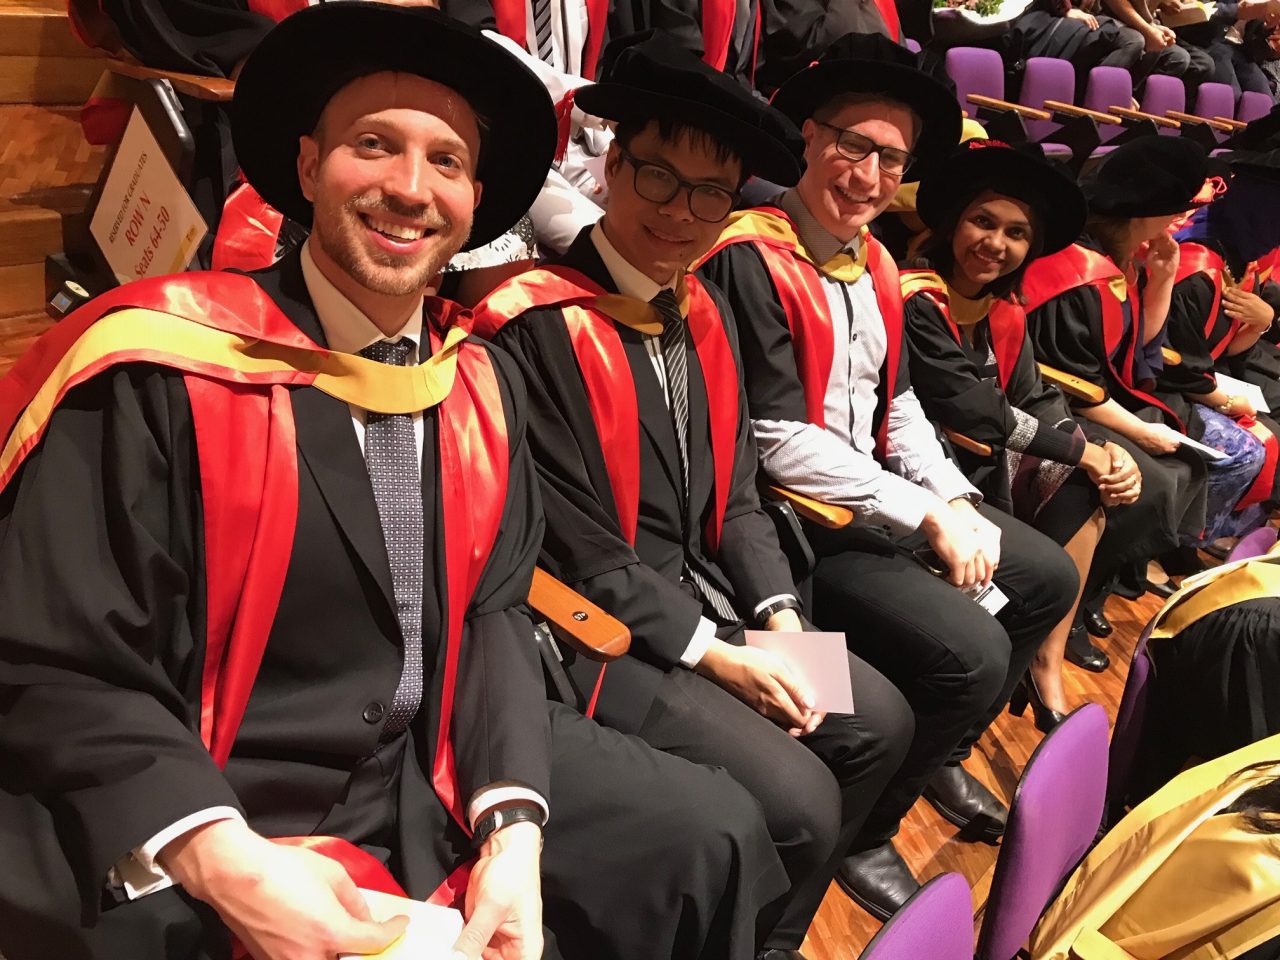 postgraduate research students at their graduation